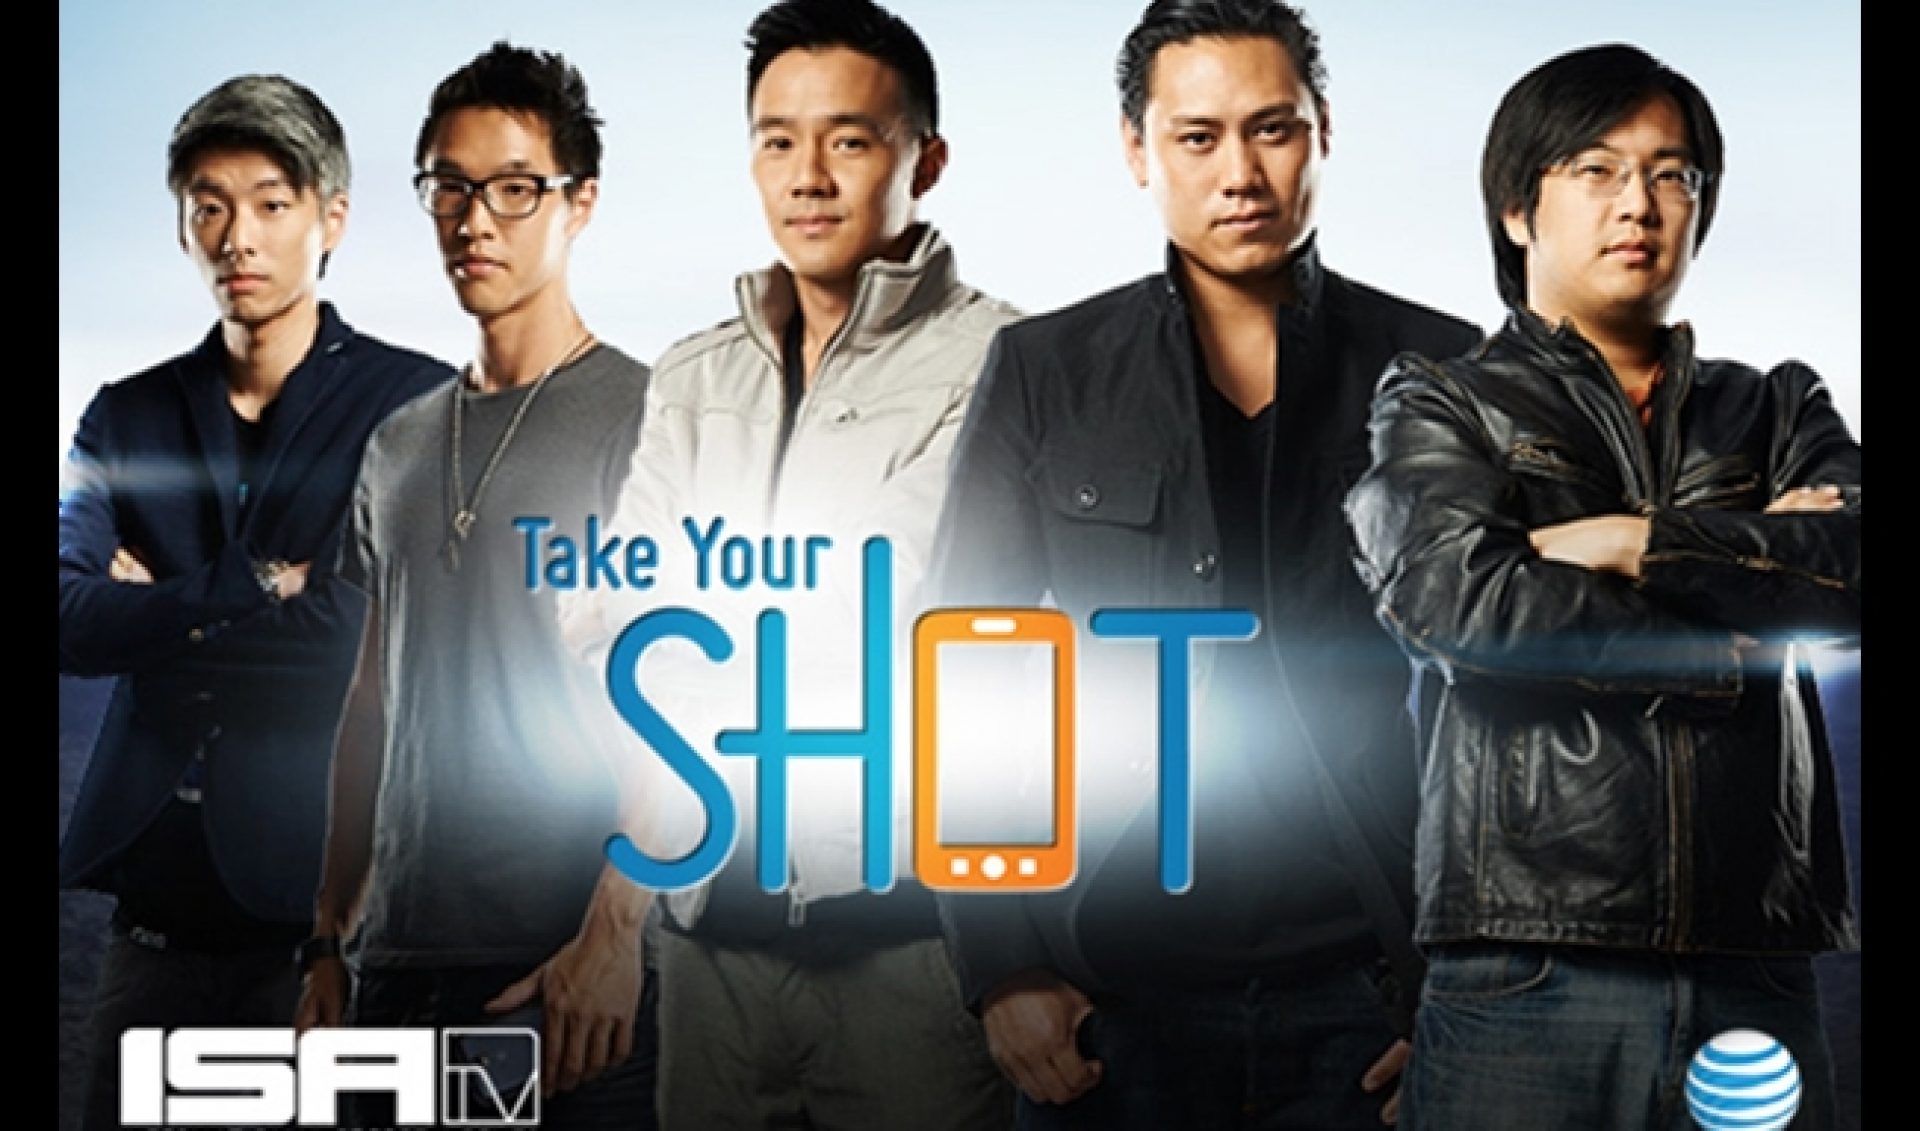 Wong Fu, Jon M. Chu, FreddieW To Serve As Mentors For AT&T Contest